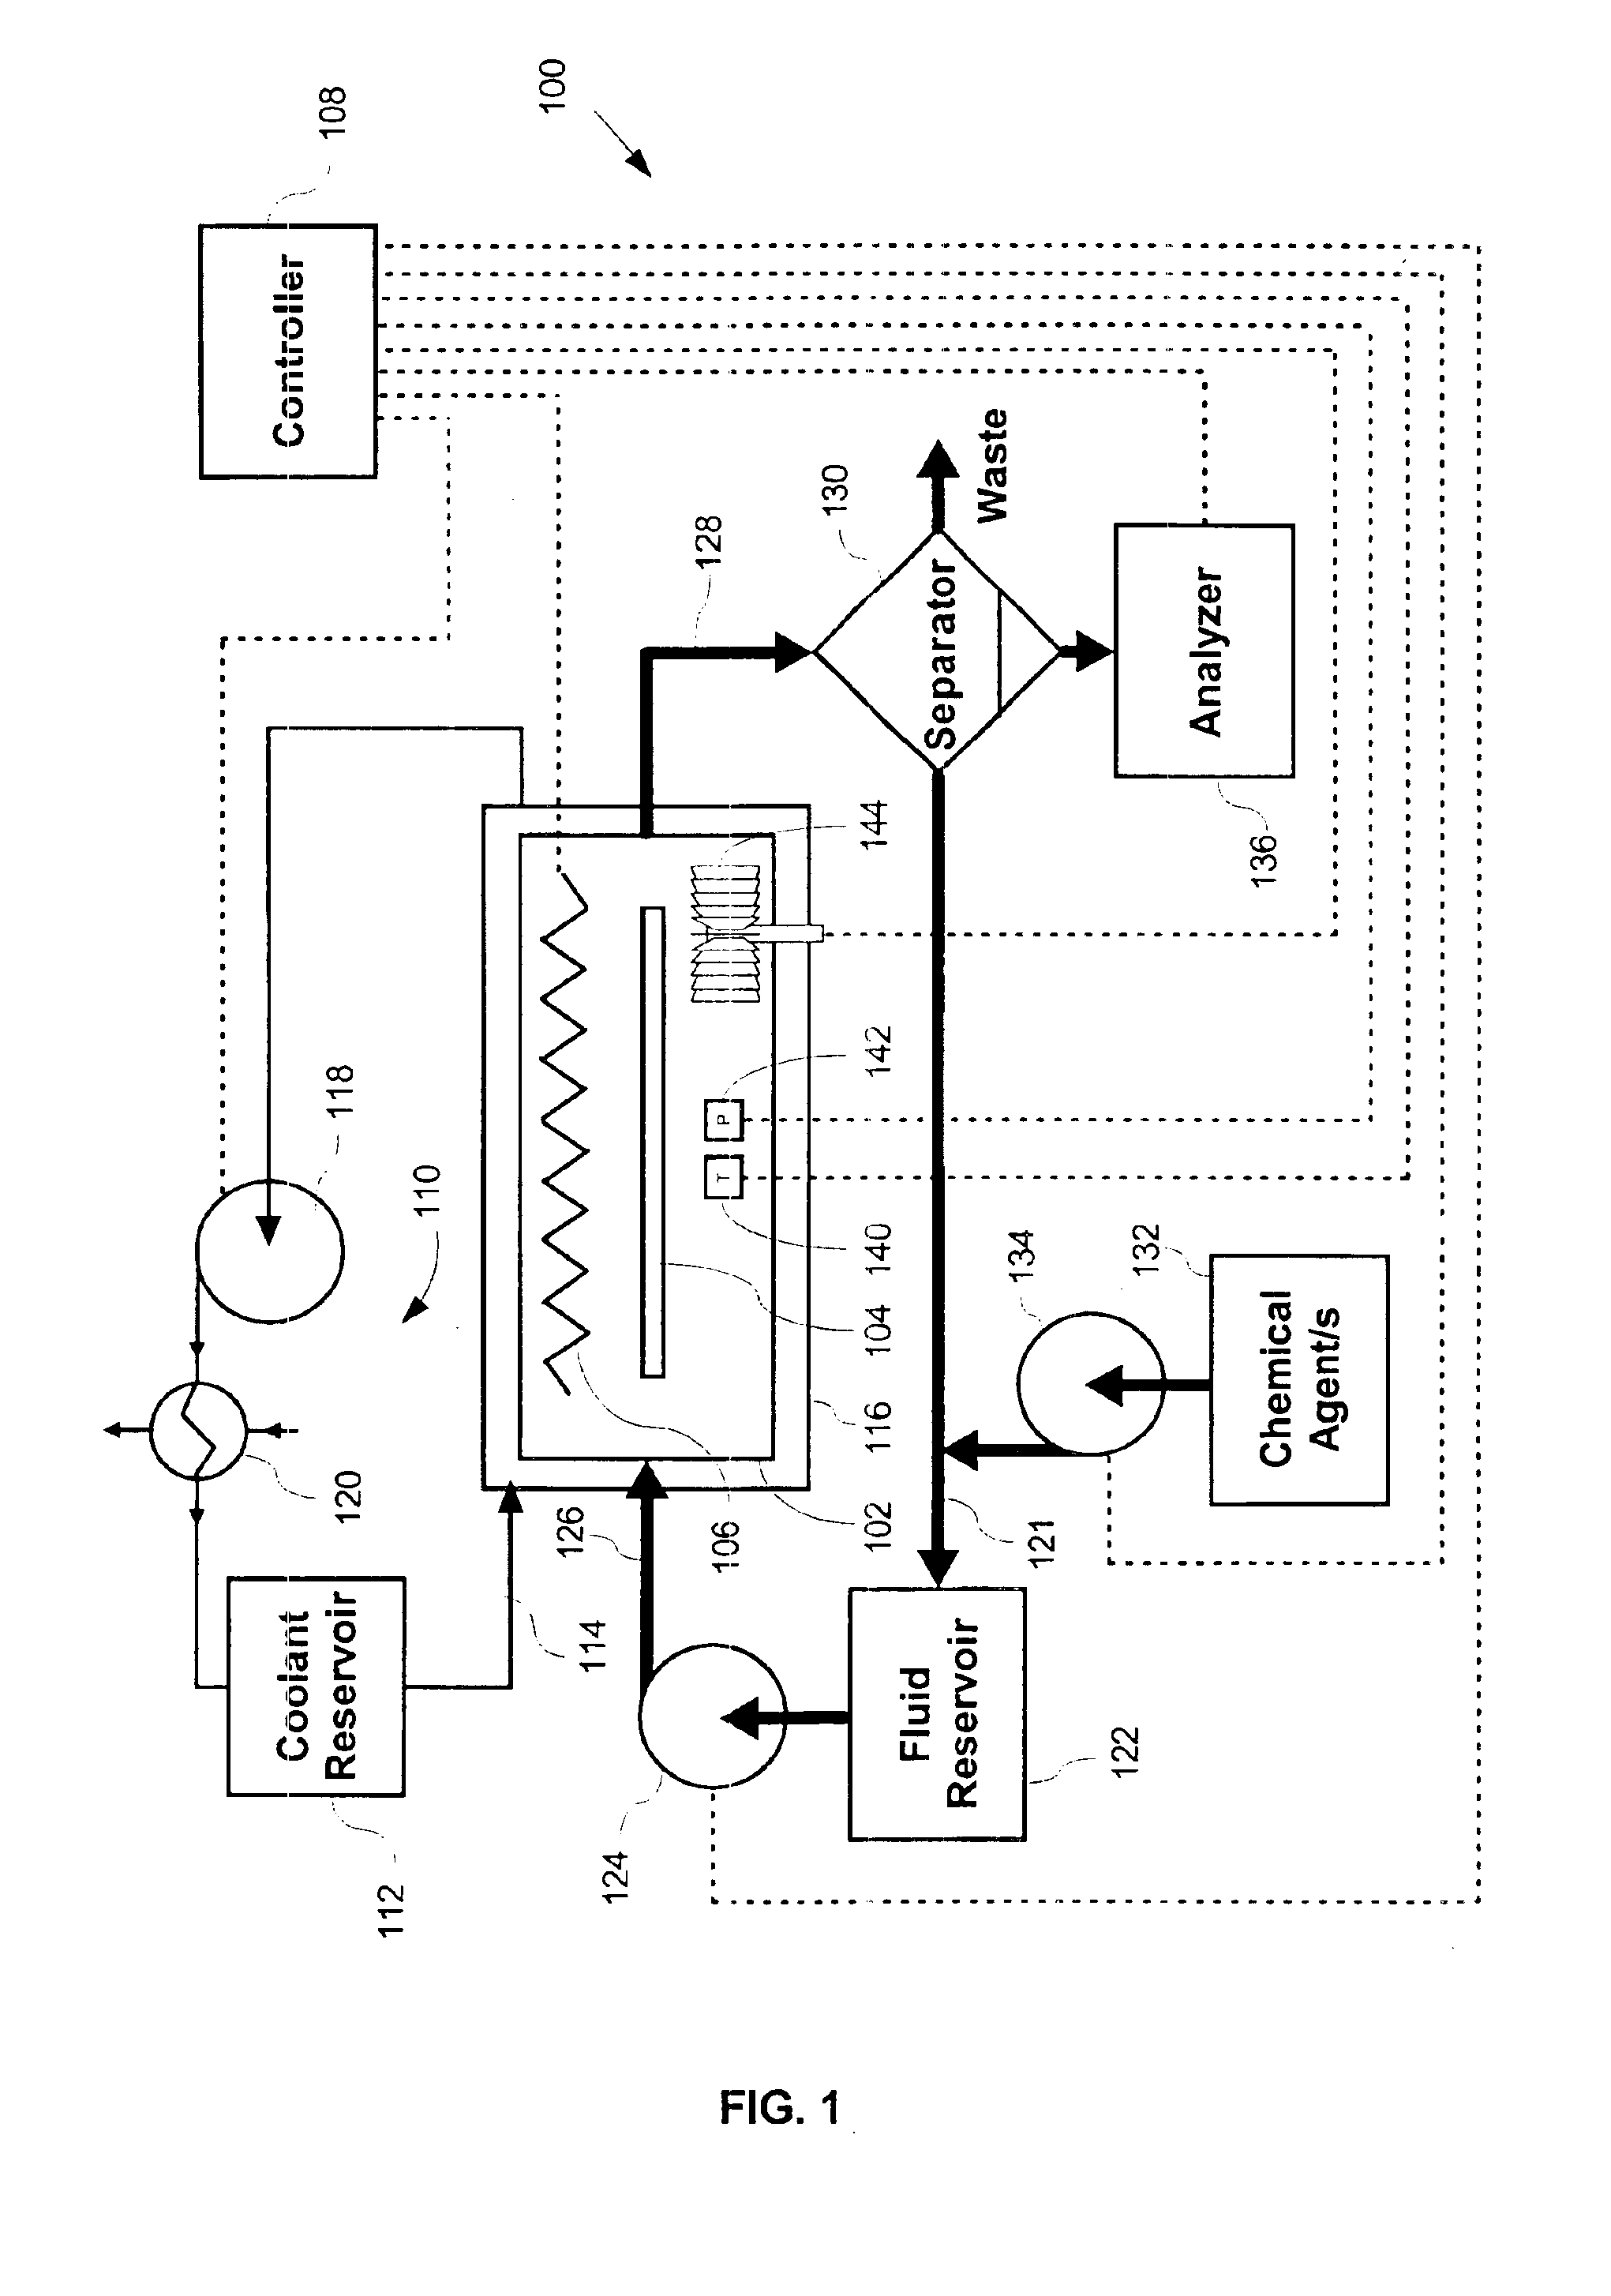 Automated dense phase fluid cleaning system